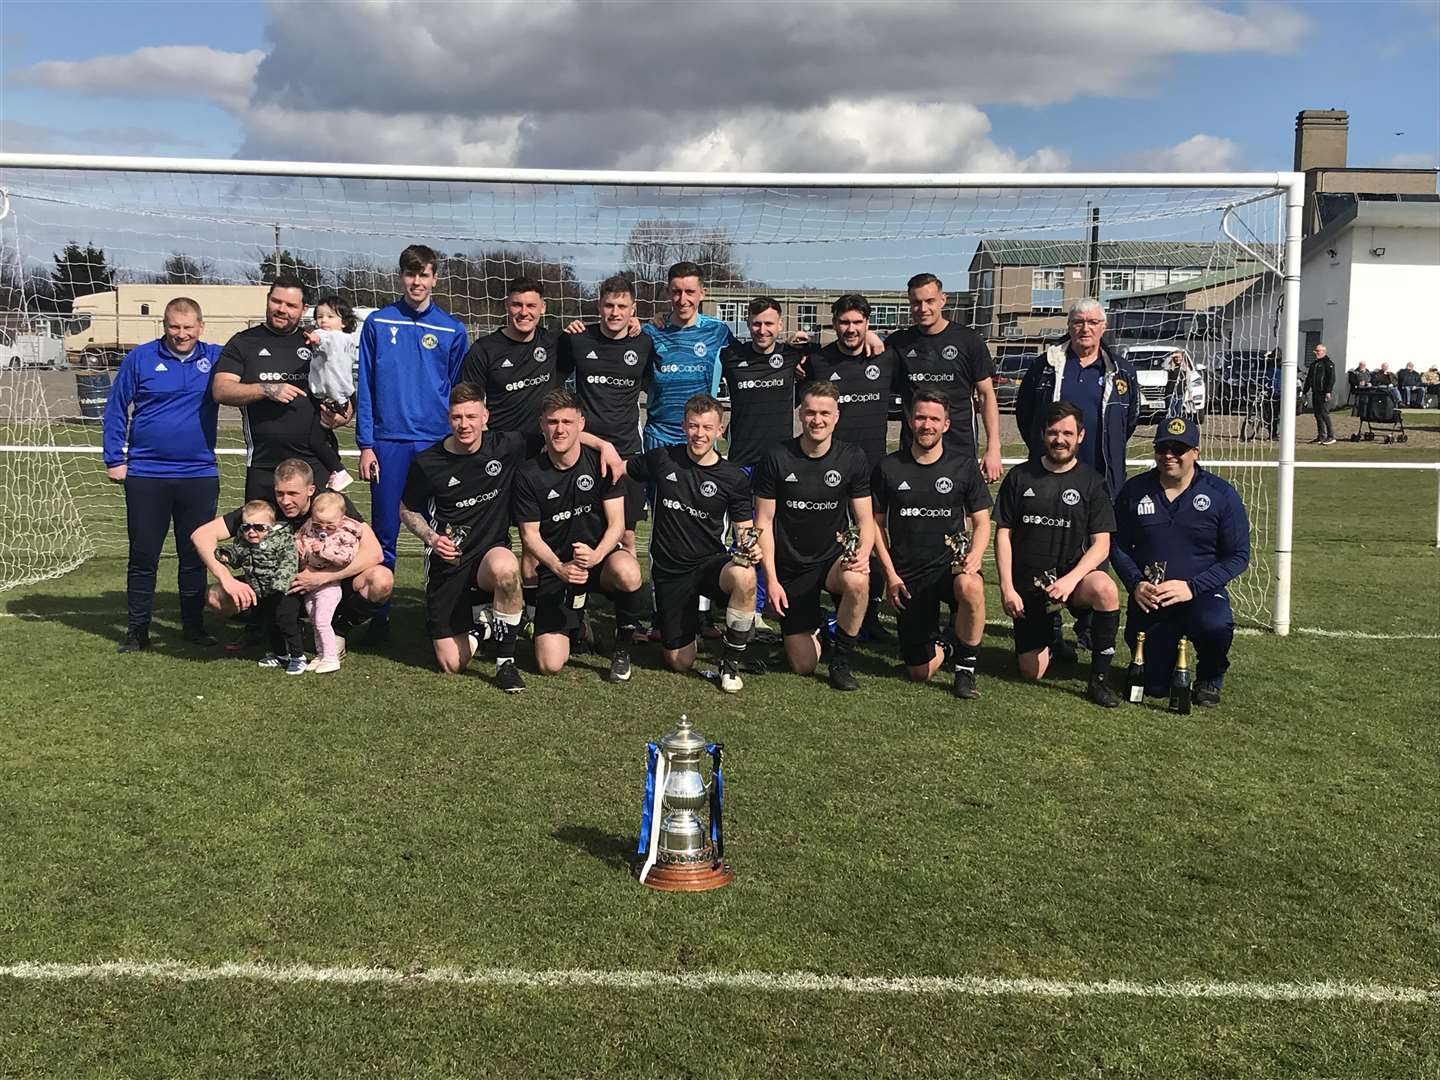 Invergordon qualified for the Scottish Cup this season by winning the North Caledonian League.  Photo: Will Clark